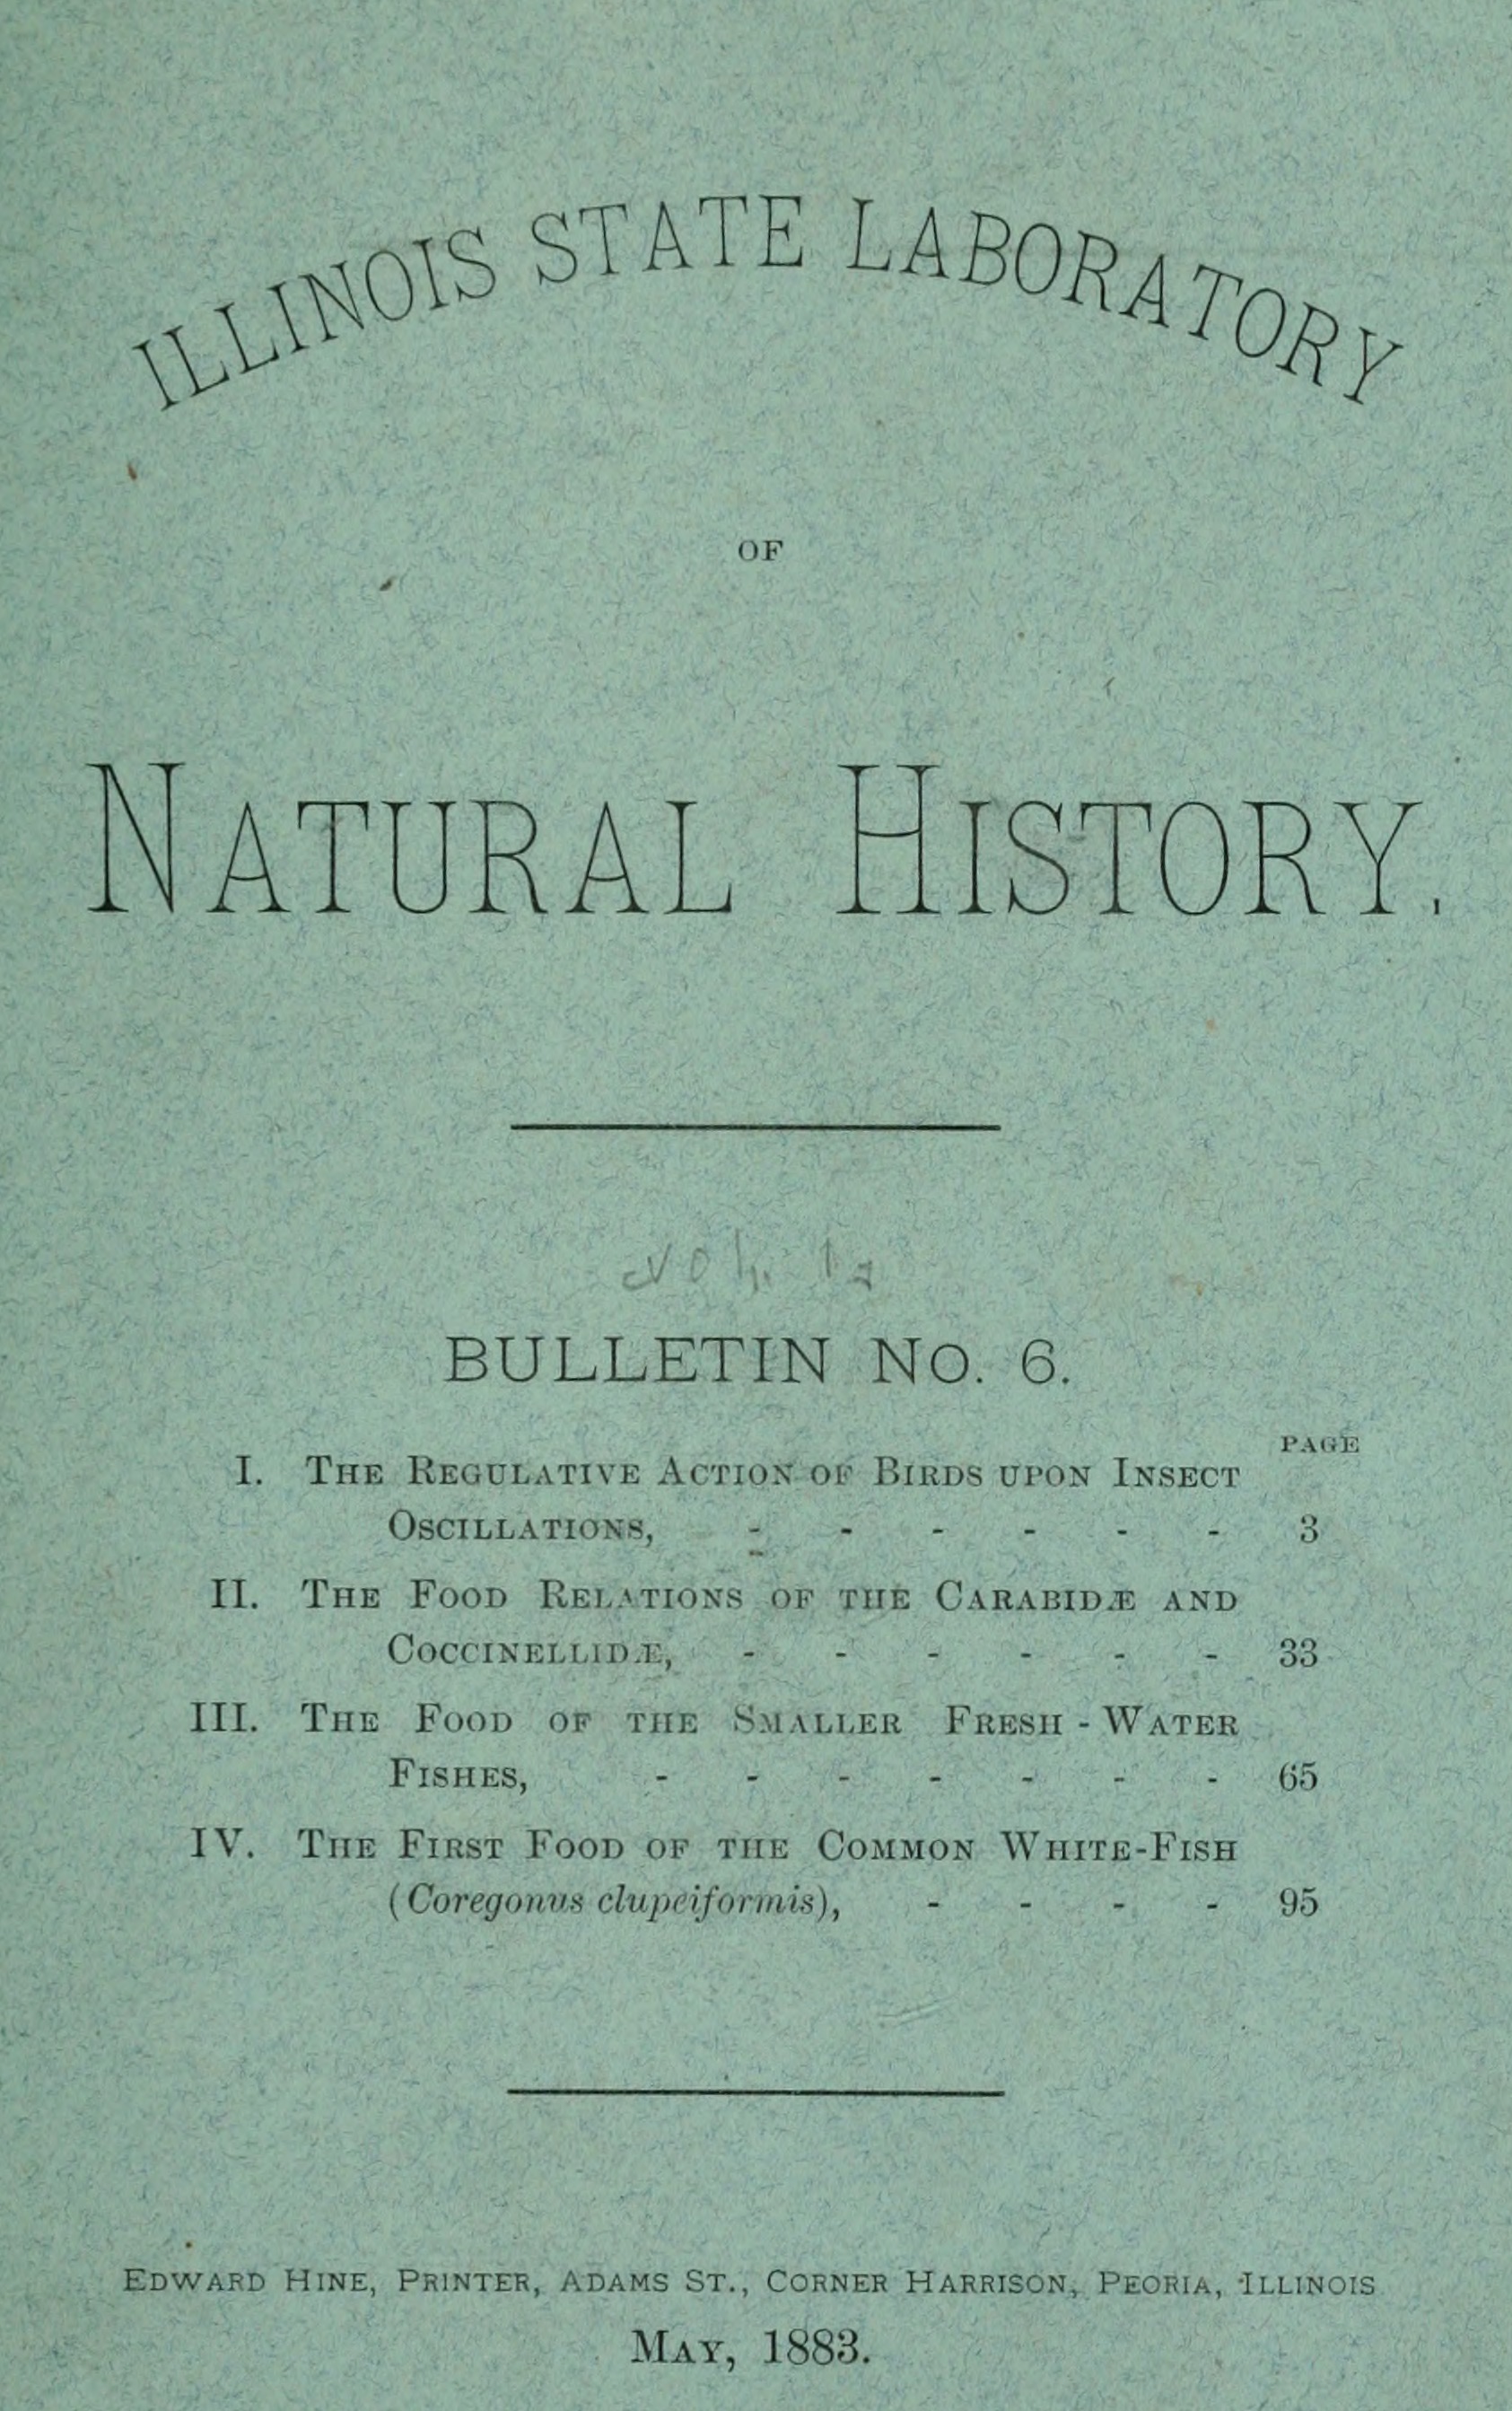 					View Vol. 1 No. 6 (1883): Studies of the Food of Birds, Insects, and Fishes Made at the Illinois State Laboratory of Natural History, at Normal, Illinois
				